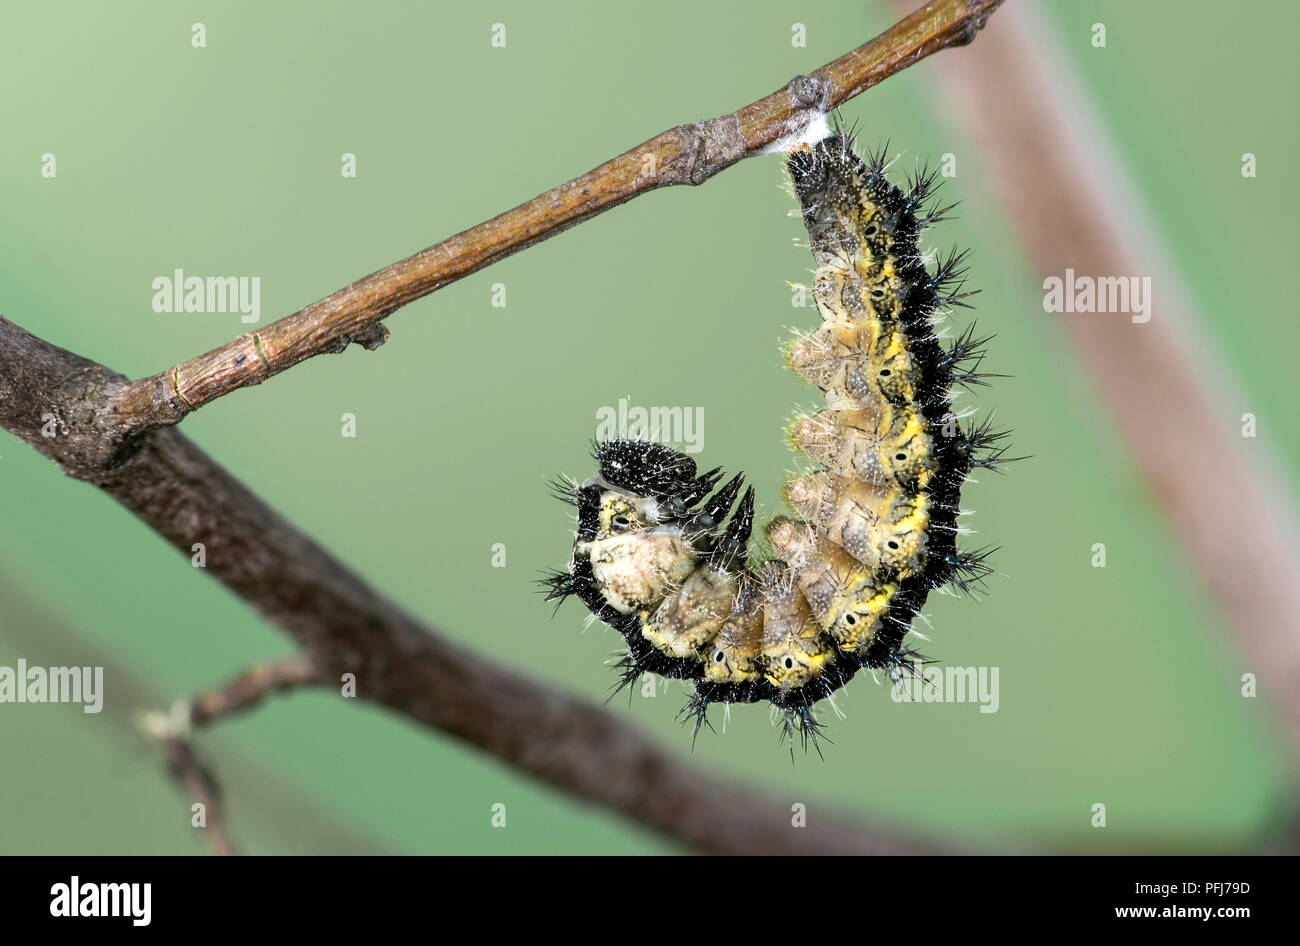 Caterpillar of Small tortoiseshell (Aglais urticae), a butterfly of the Nymphalidae family, ready to pupate, Switzerland Stock Photo